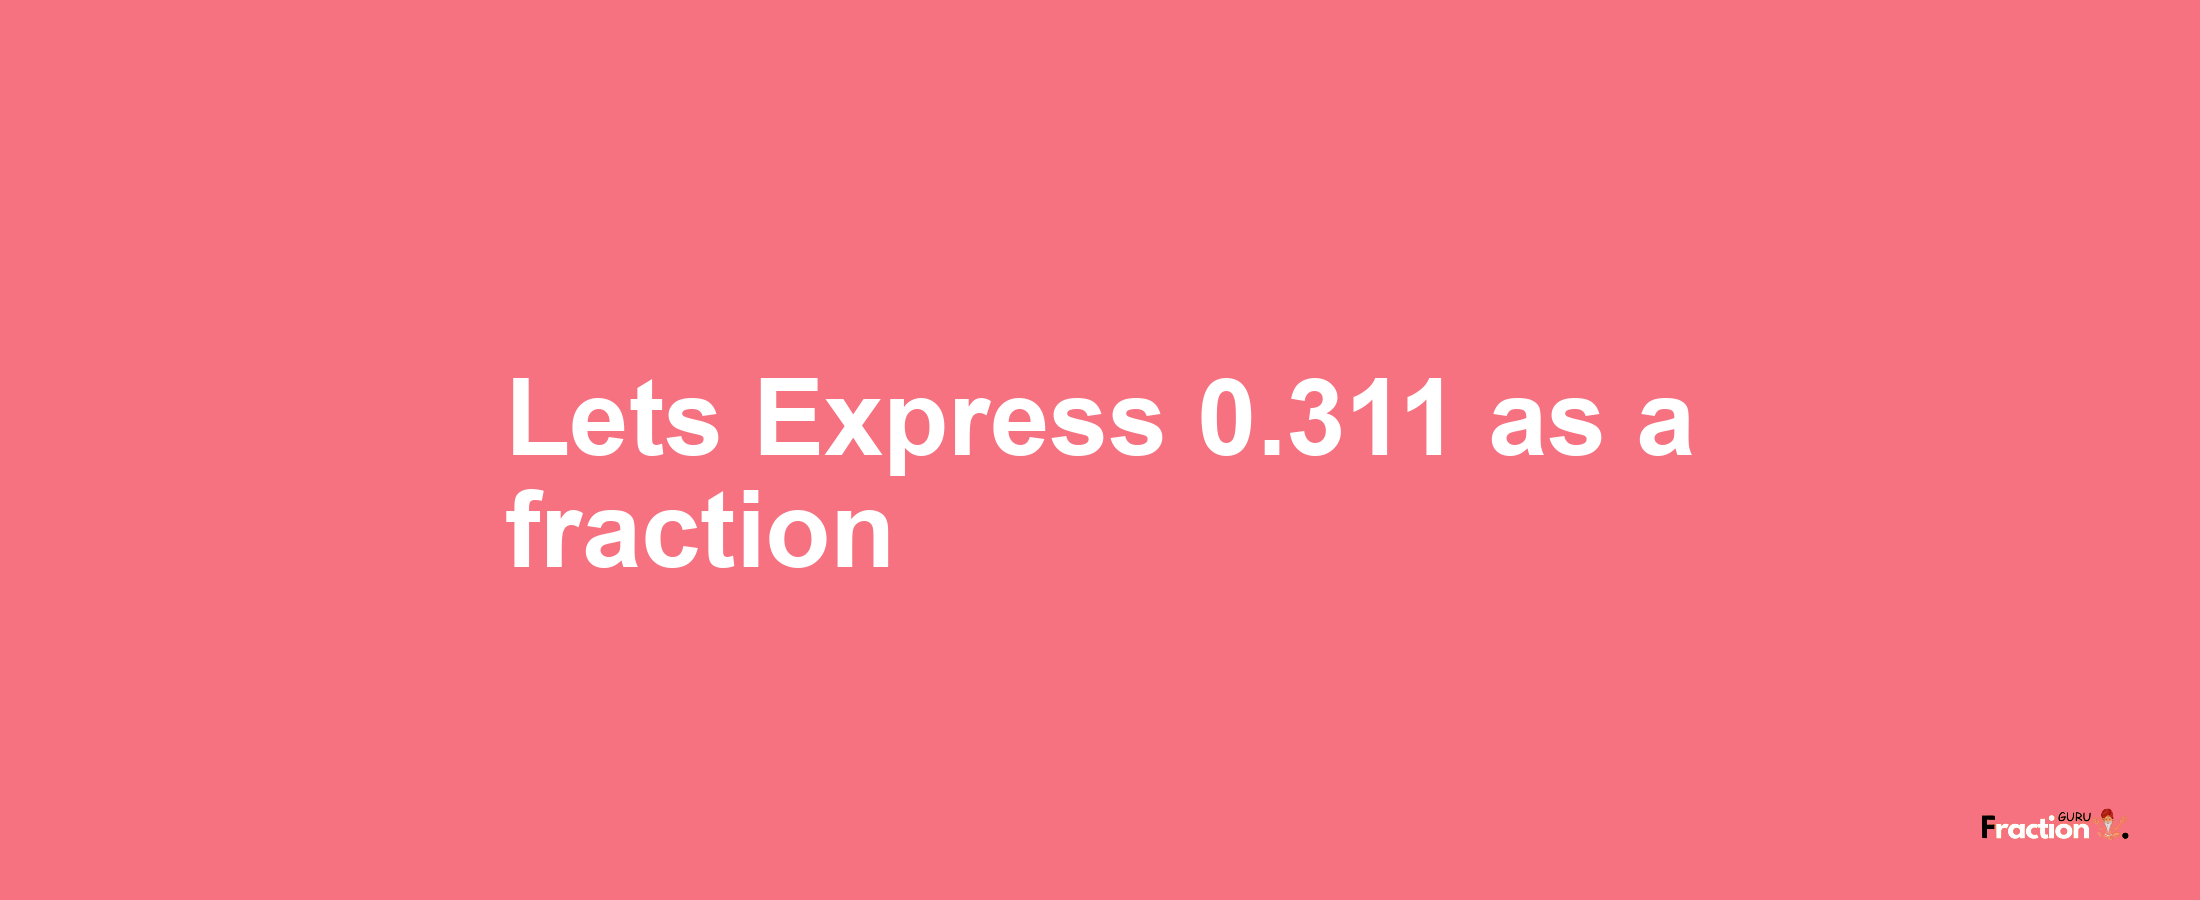 Lets Express 0.311 as afraction